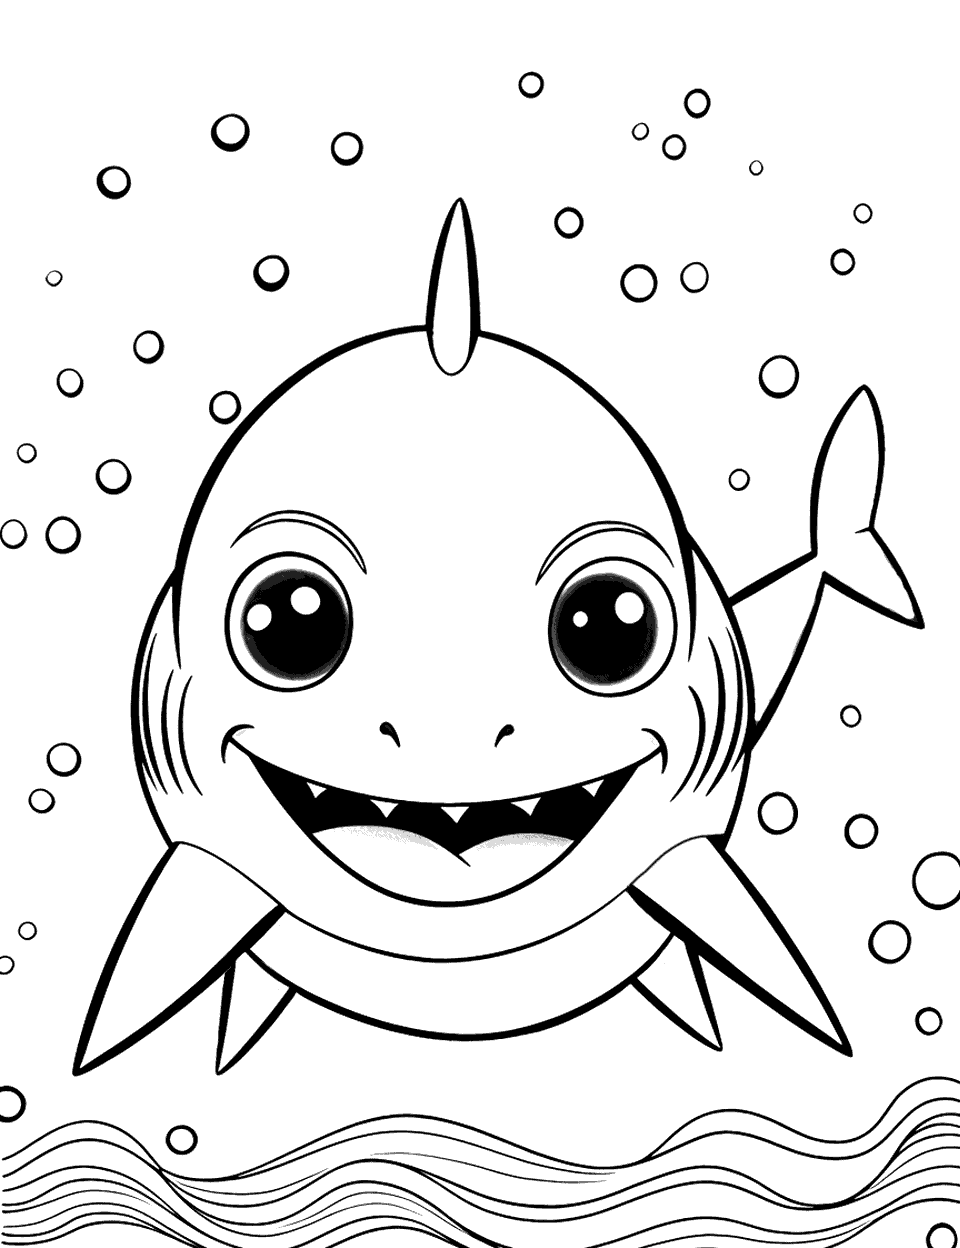 Toddler Baby Shark Coloring Page - A very young Baby Shark learning to swim.